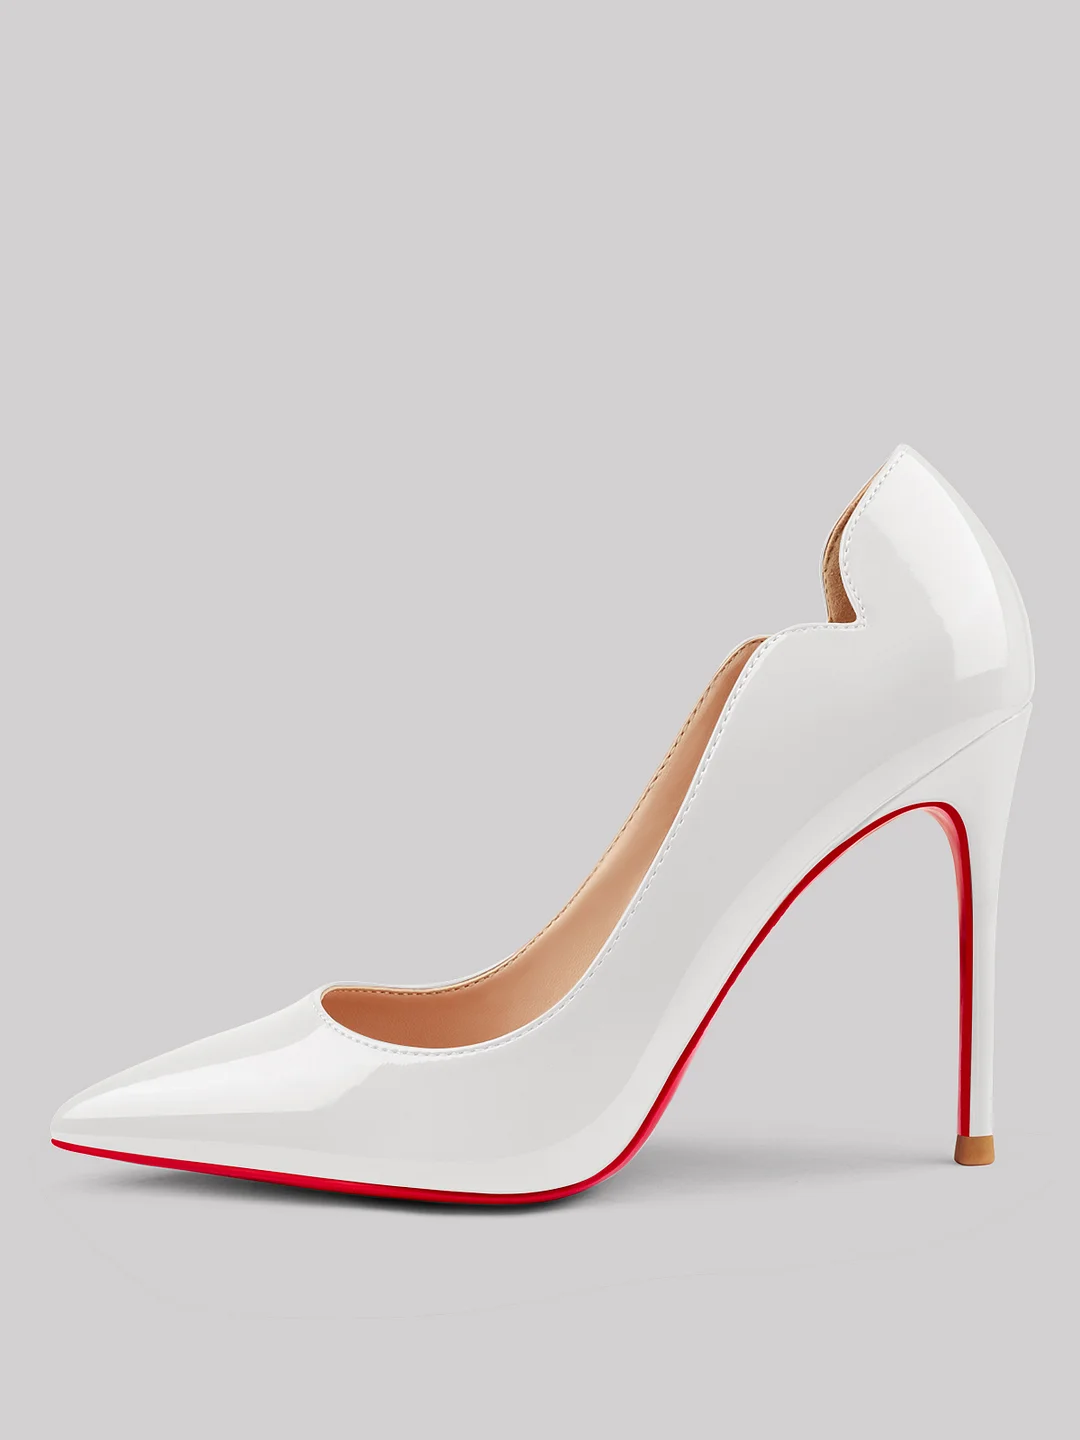 3.94" Women's Classic Pointed Toe V-Shaped Red Bottom High Heels for Party Wedding Patent Pumps